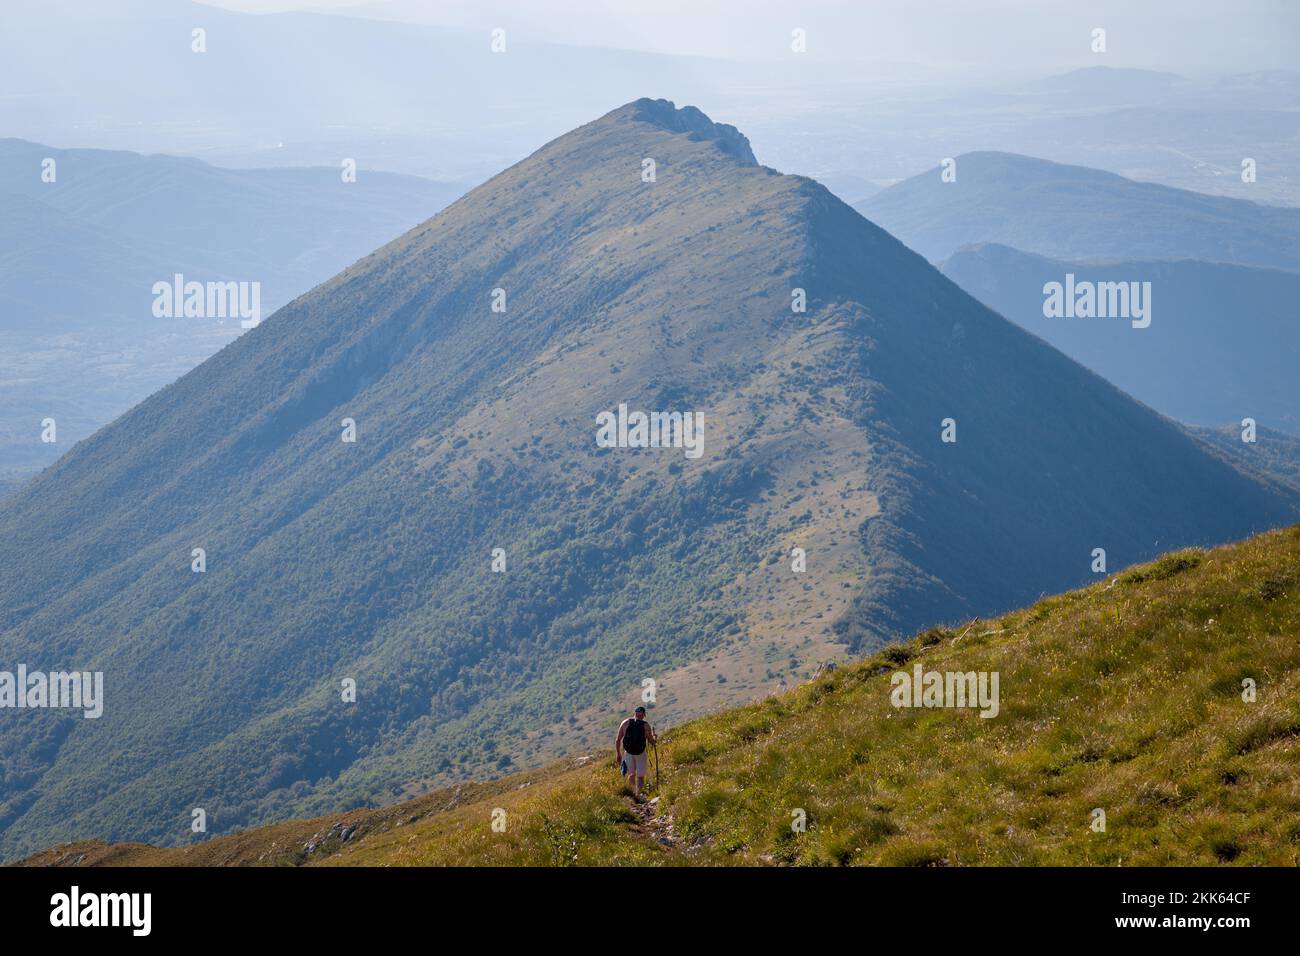 A lone hiker hiking down the mountain path, with a ridge in the background Stock Photo